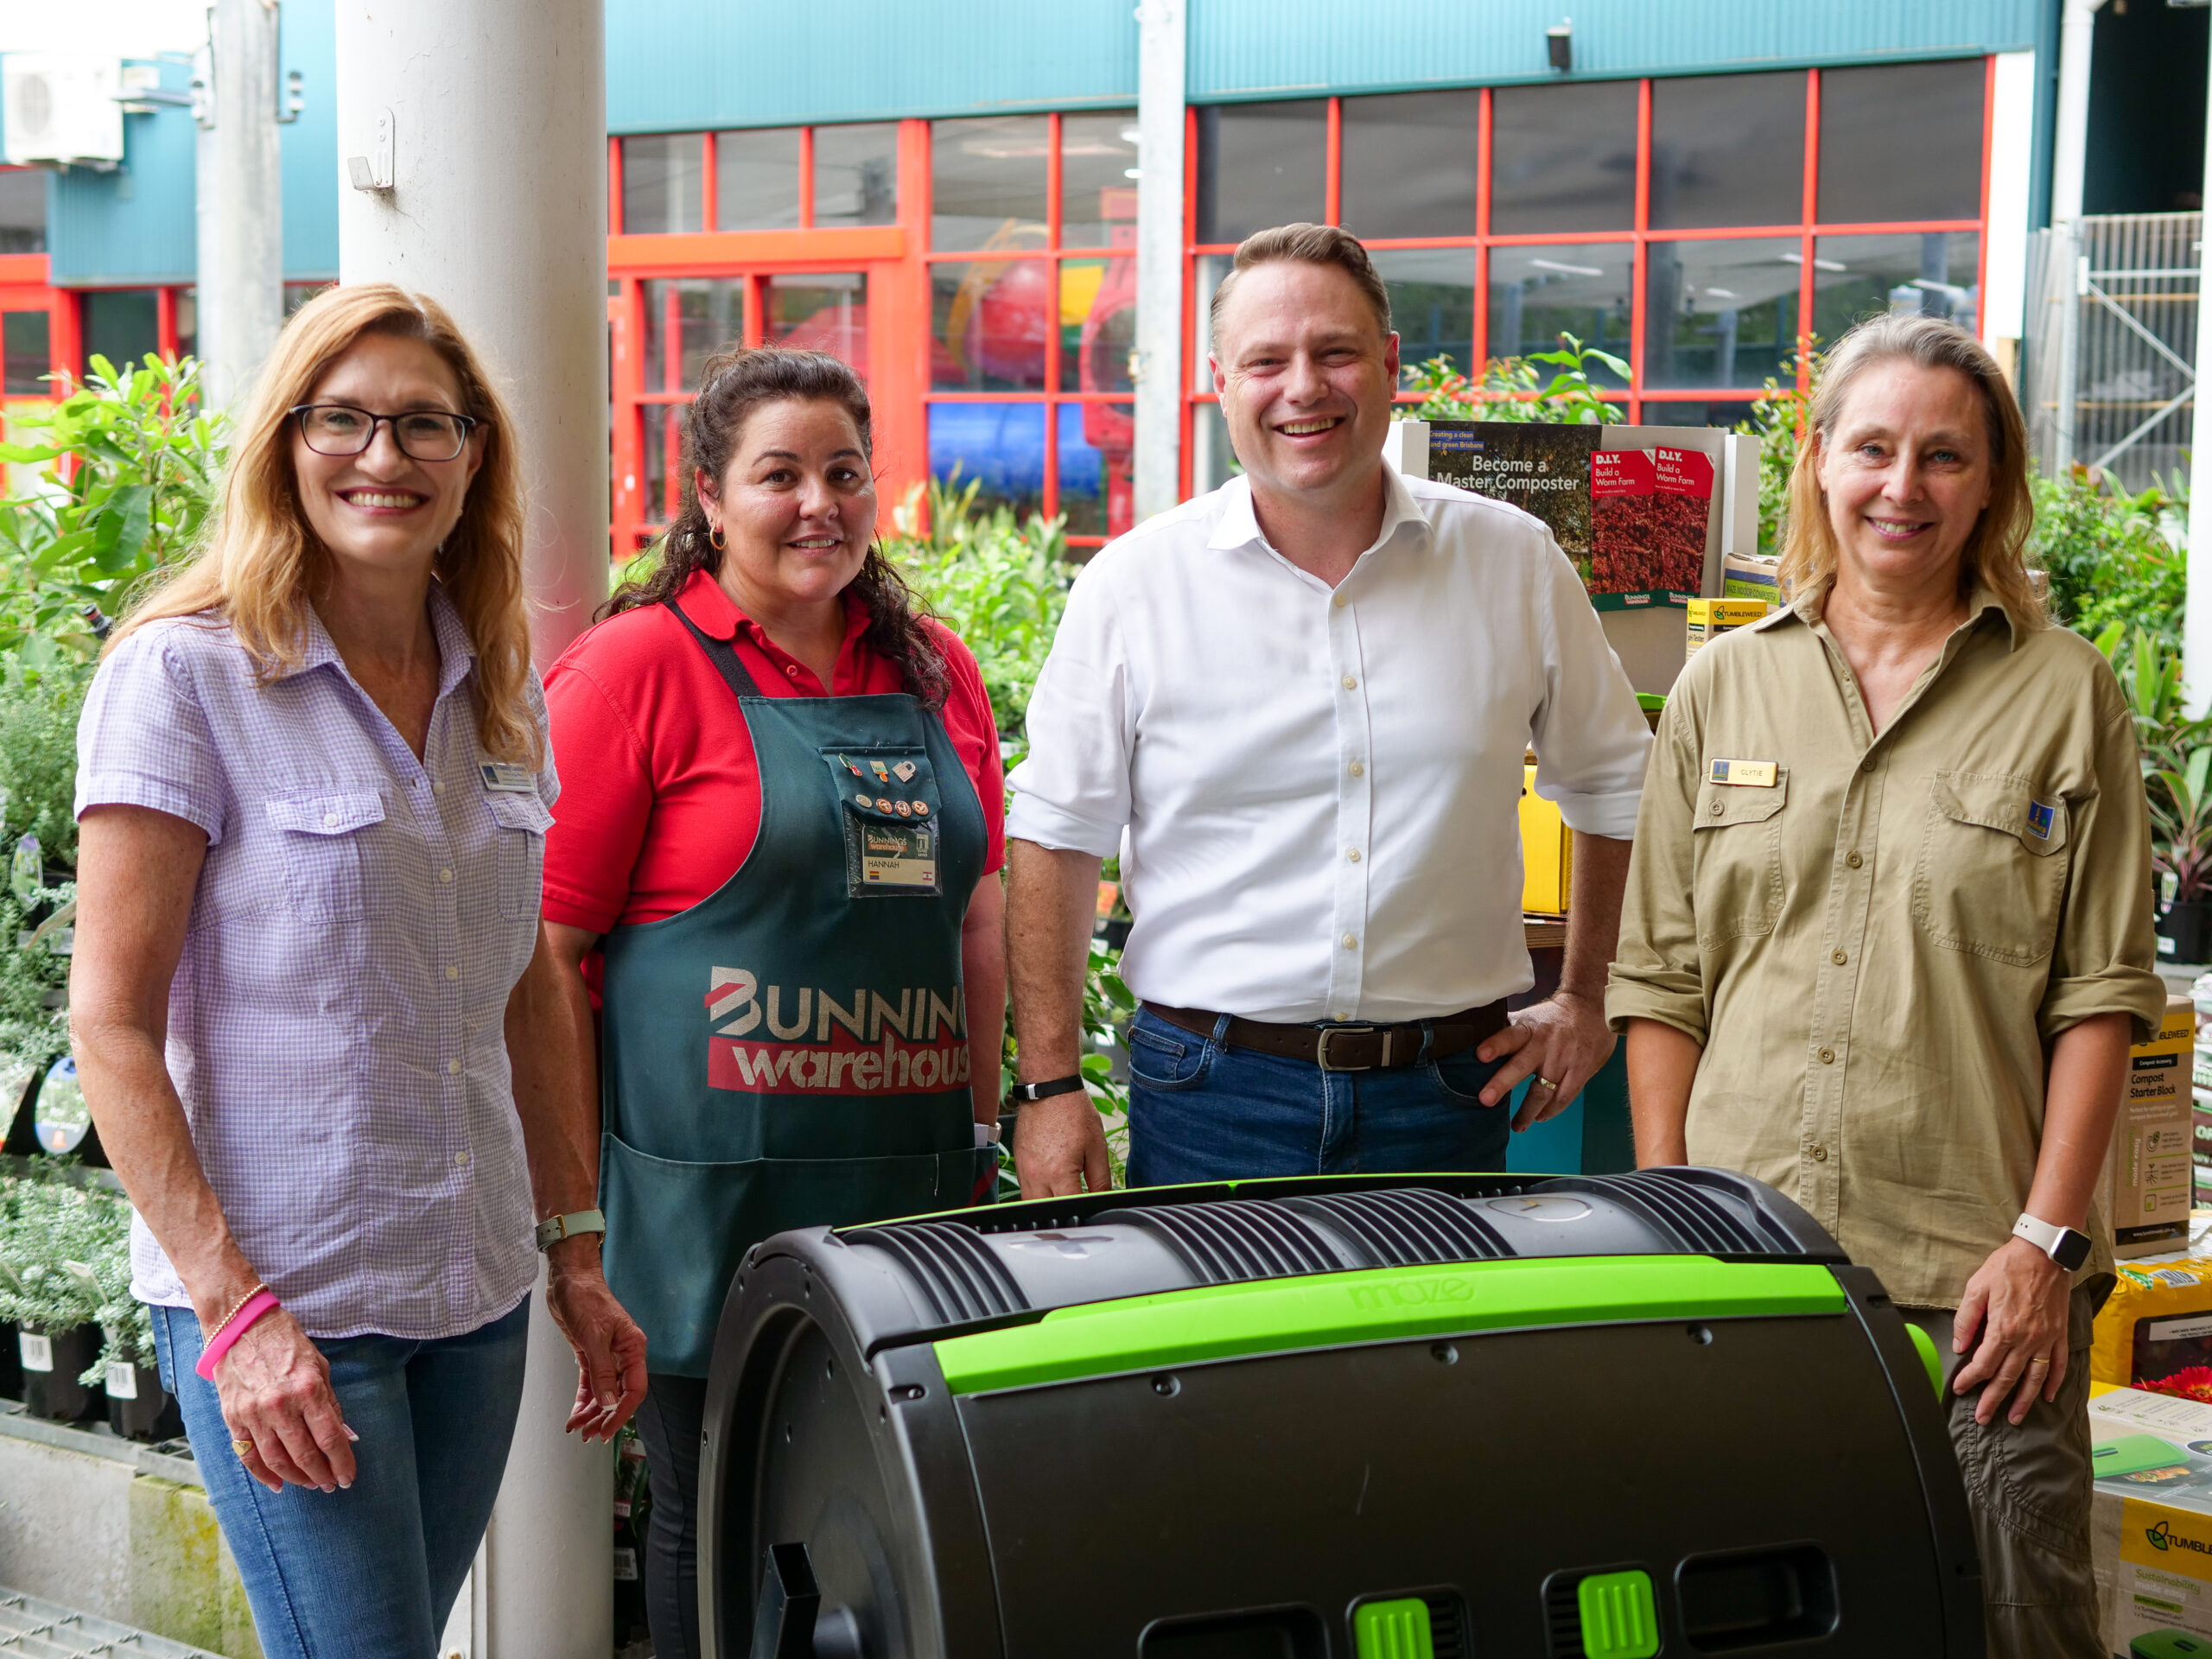 brisbane-households-champion-sustainability-at-home-with-compost-rebates